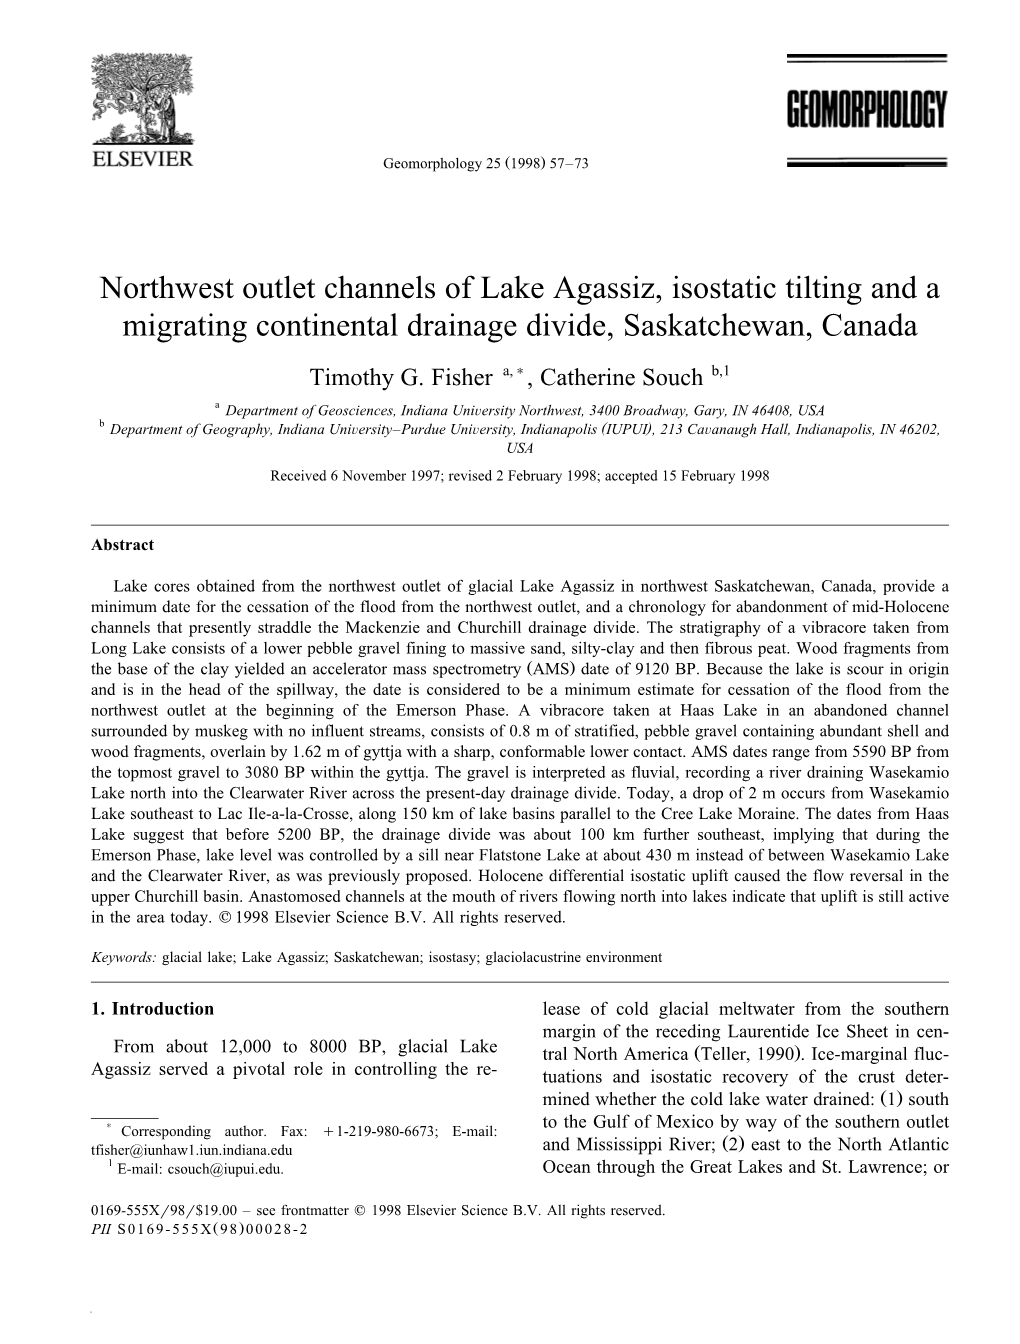 Northwest Outlet Channels of Lake Agassiz, Isostatic Tilting and a Migrating Continental Drainage Divide, Saskatchewan, Canada Timothy G